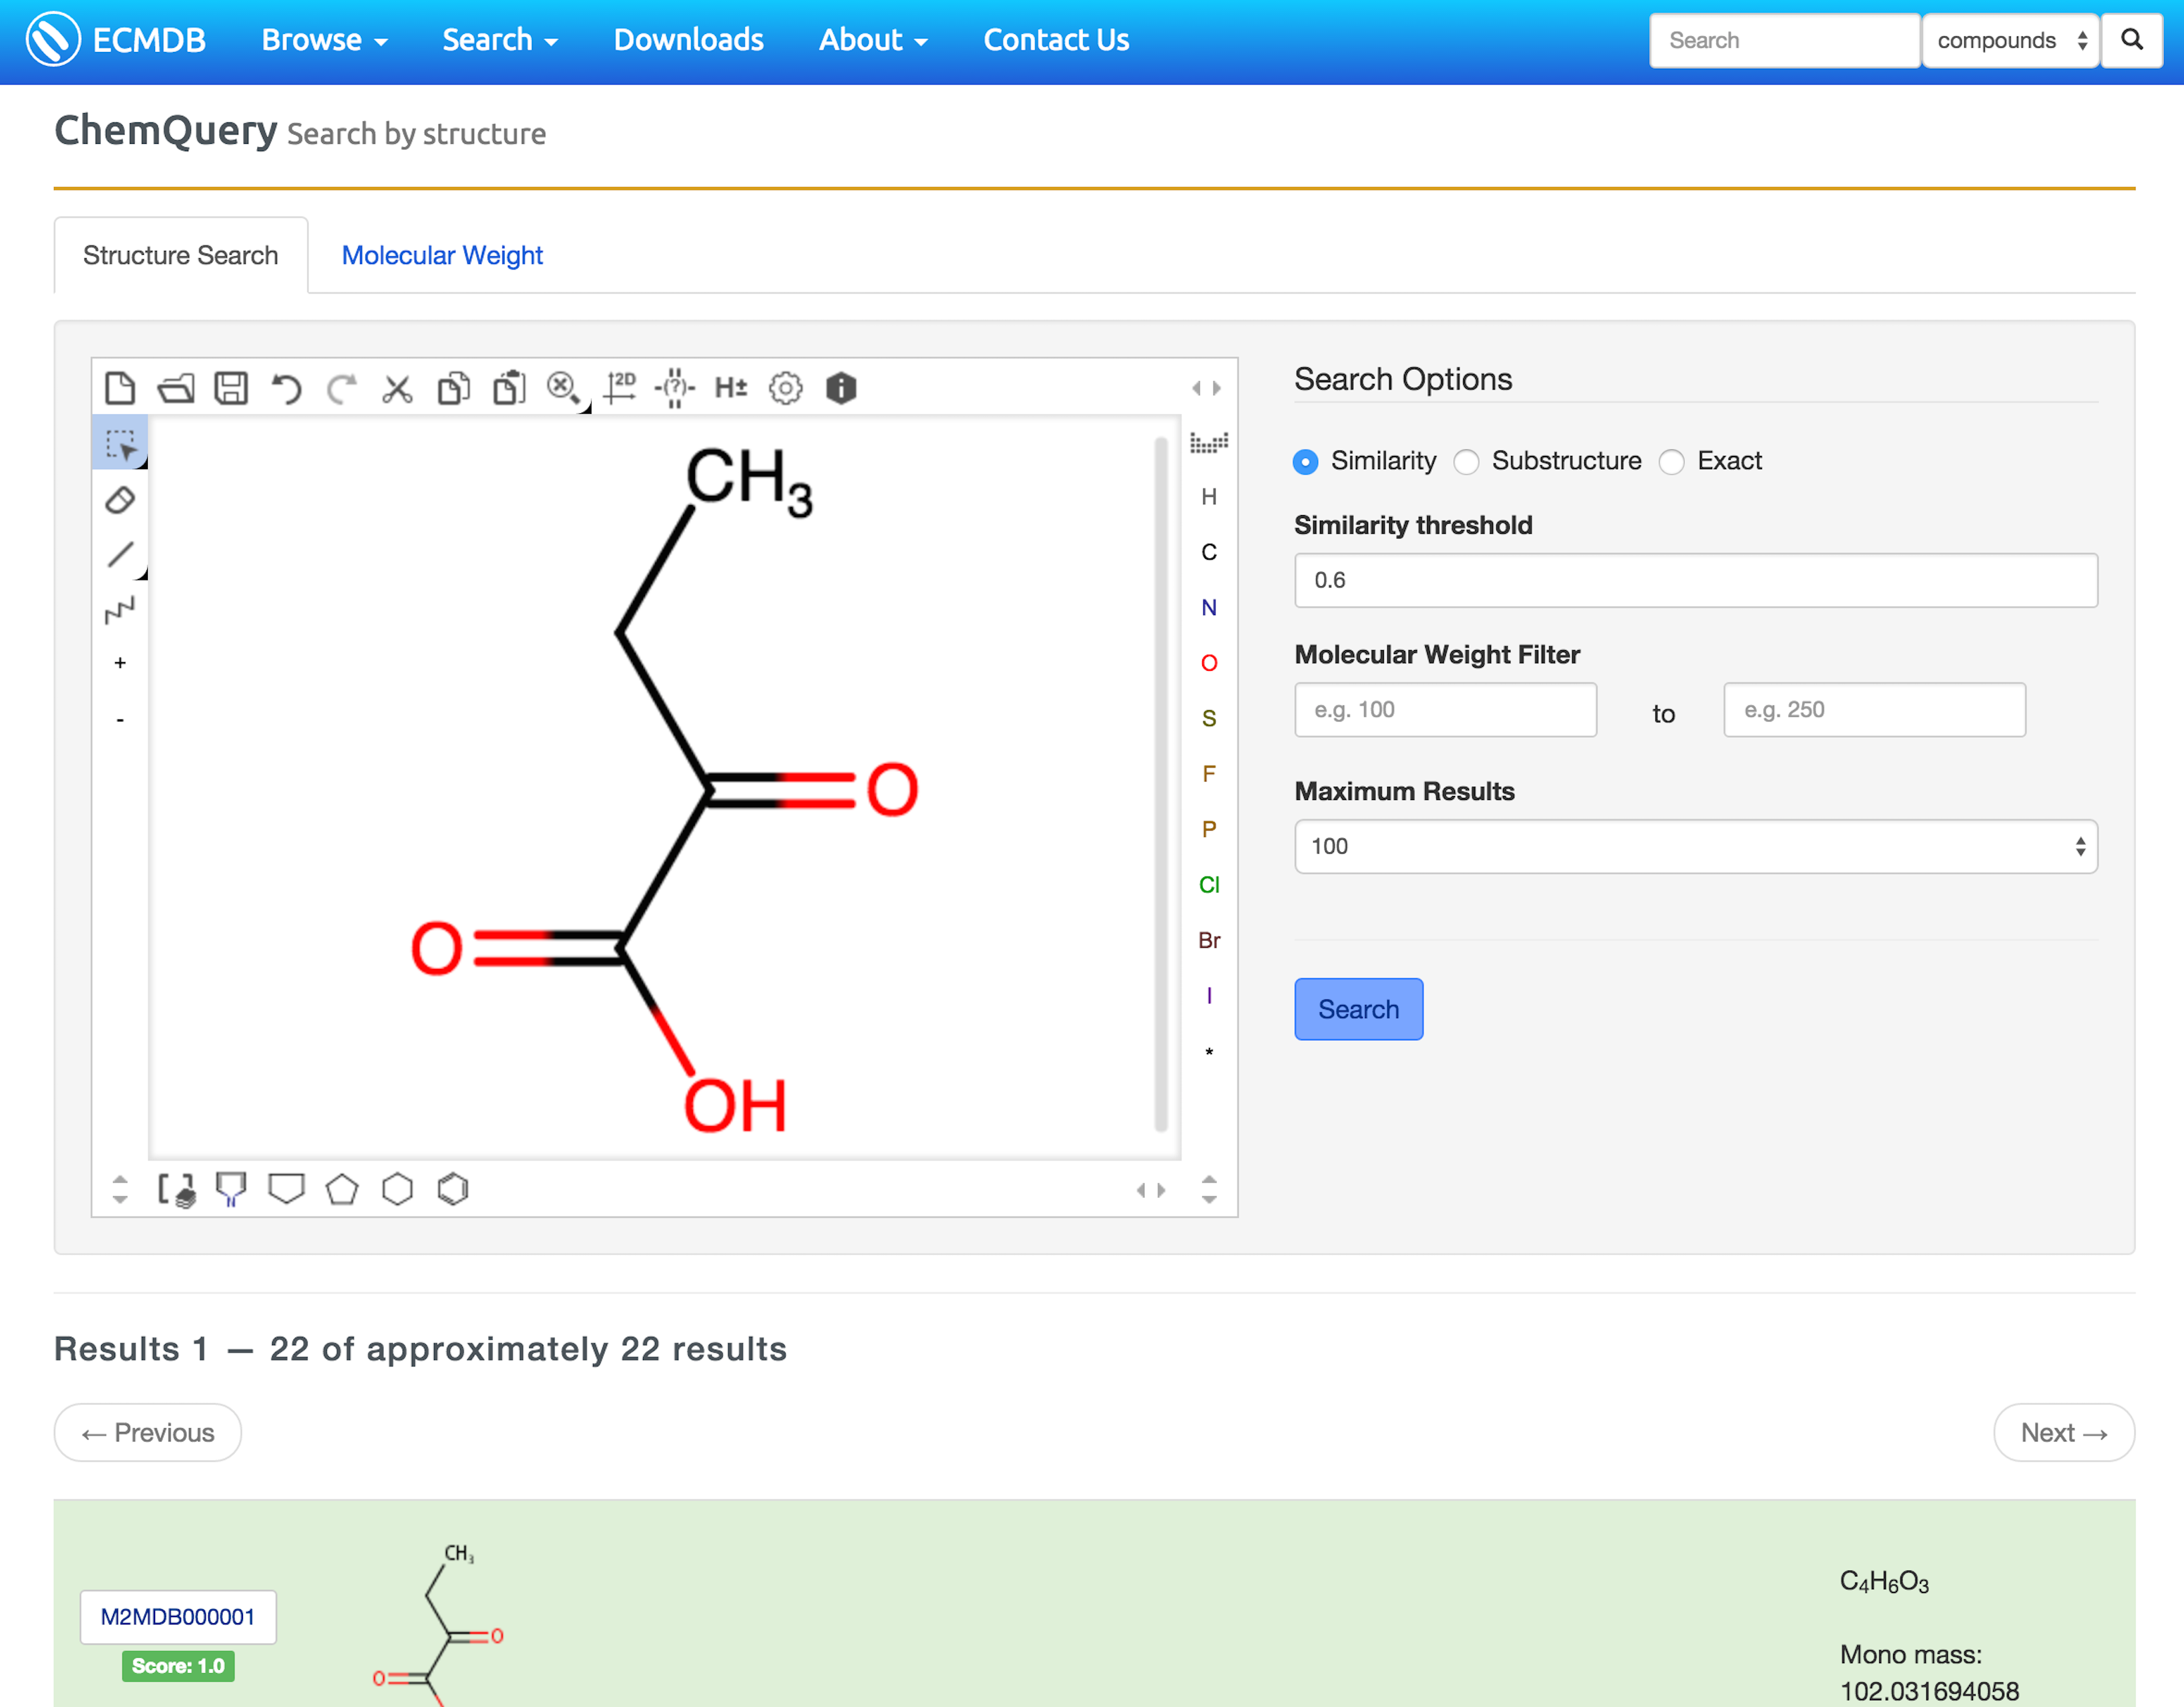 Snapshot shows a
          chemical structure search with the structure of 2-Ketobutyric
          acid